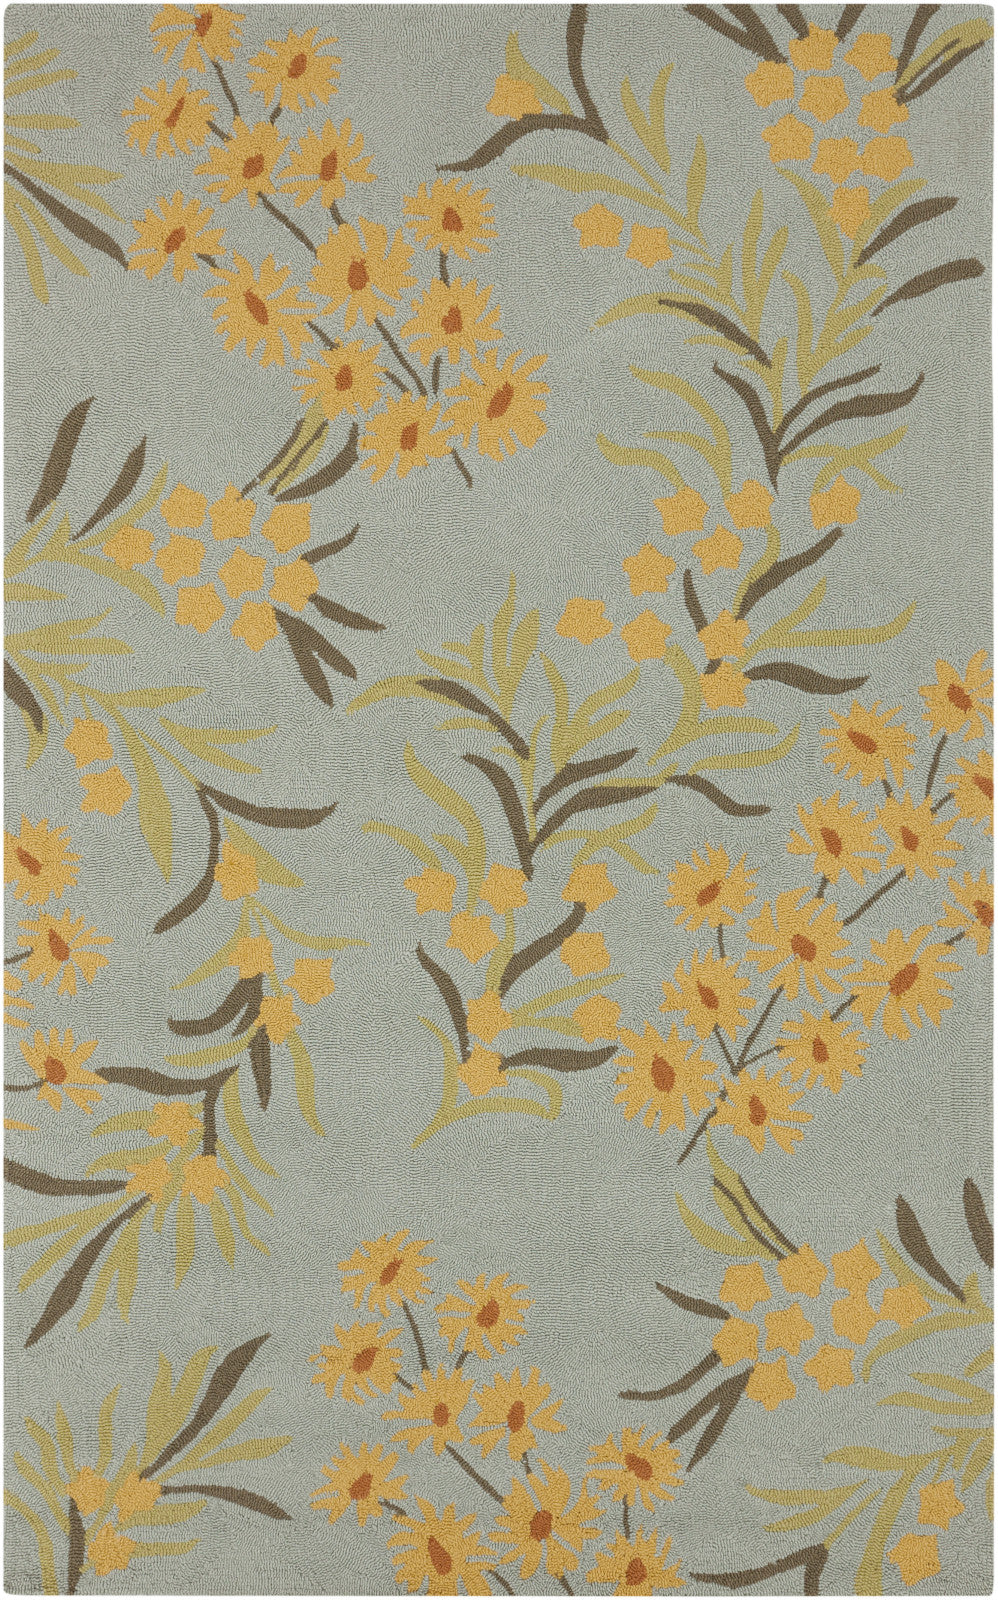 Surya Cannes CNS-5411 Area Rug by Paule Marrot